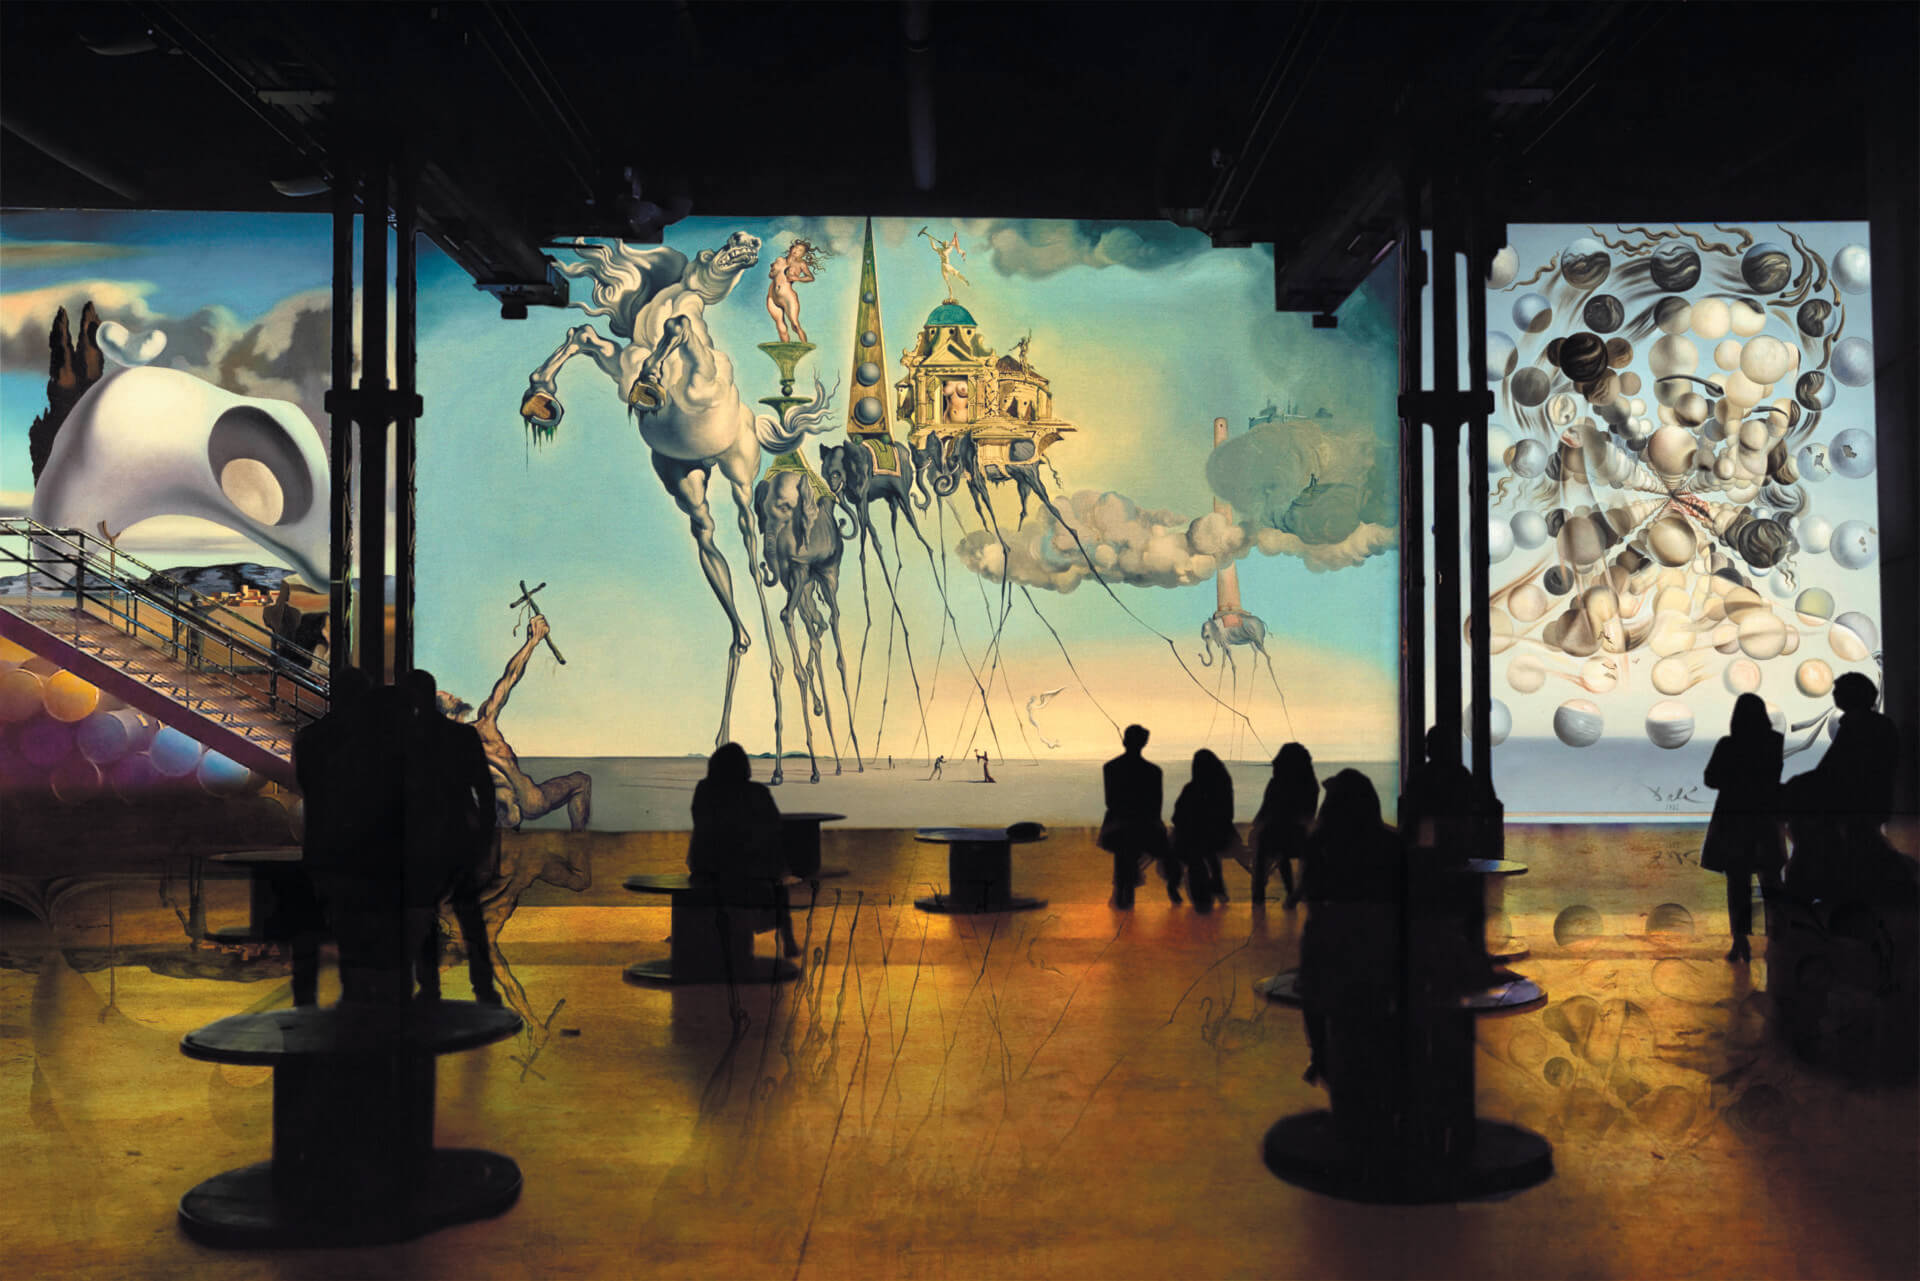 Three paintings from Dali projected on the walls 